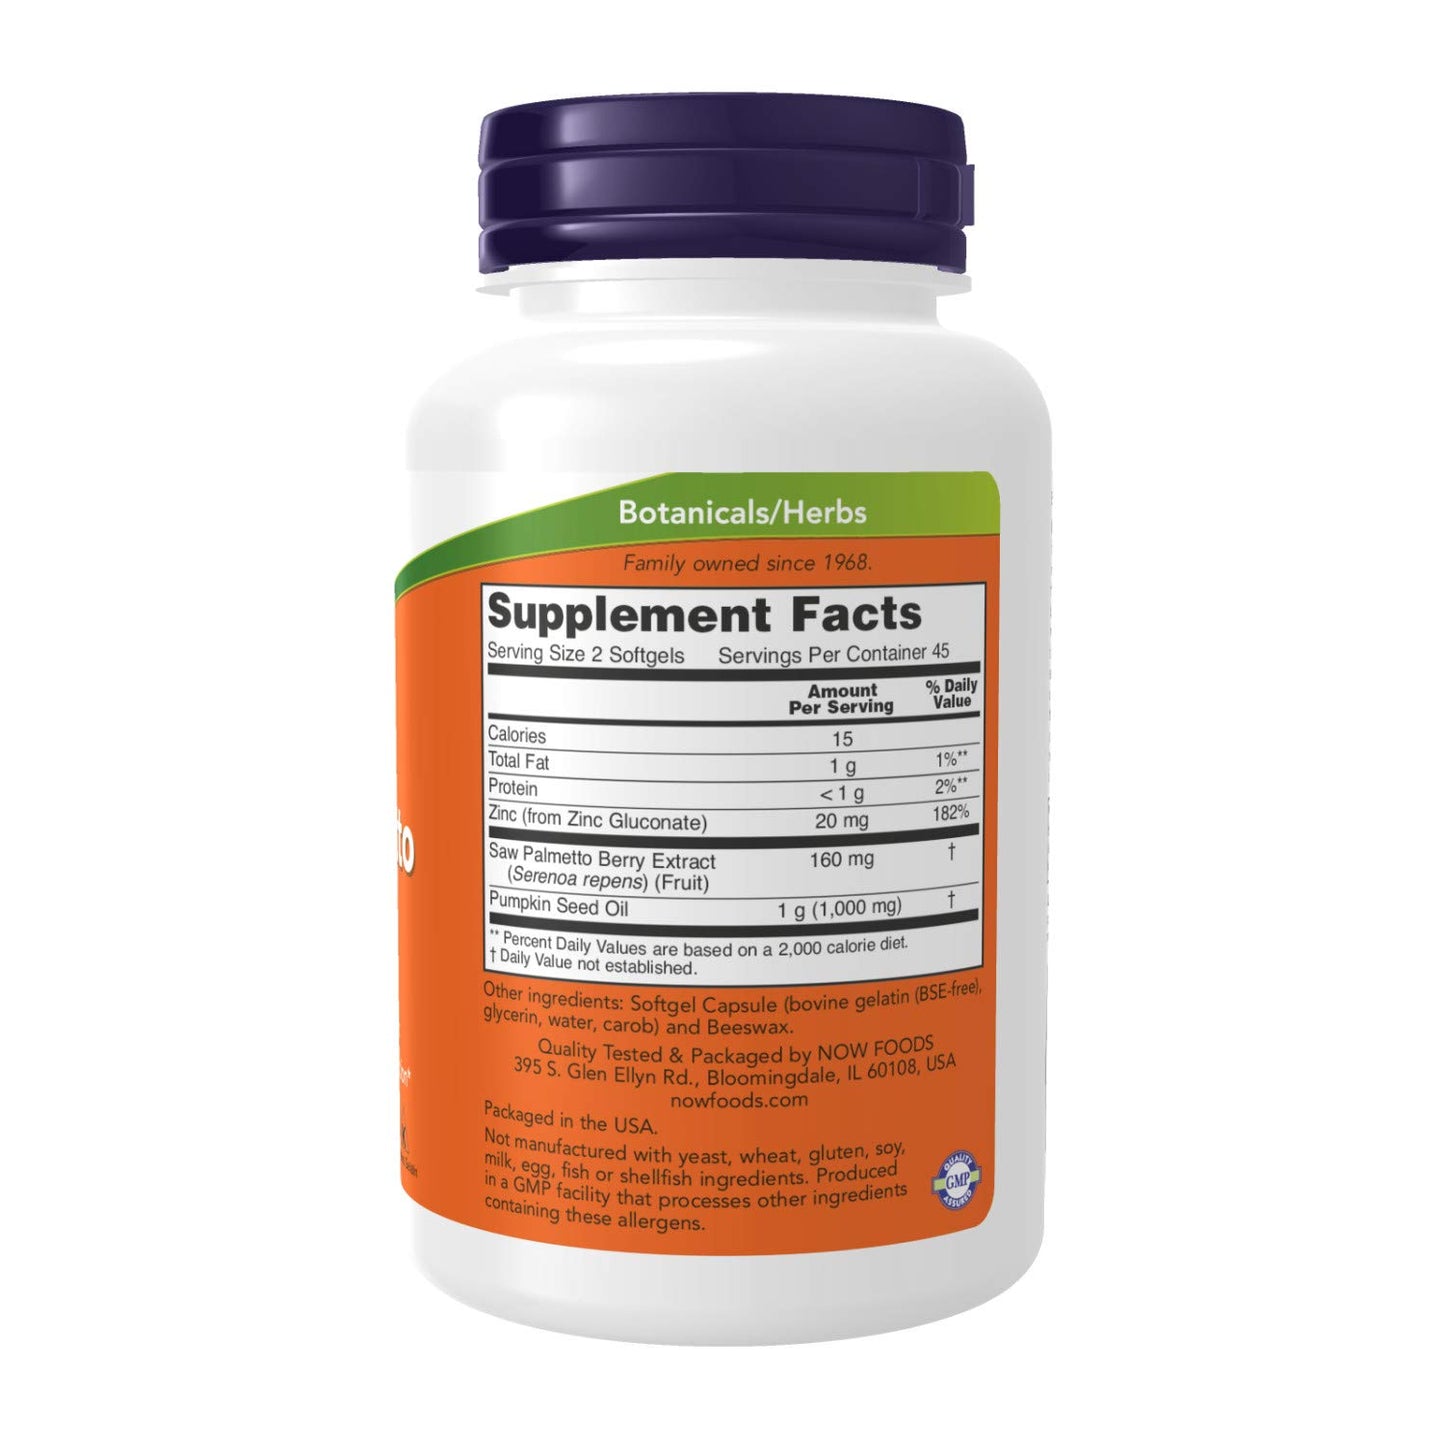 Now Foods Saw Palmetto Extract 80Mg, 90 Softgels